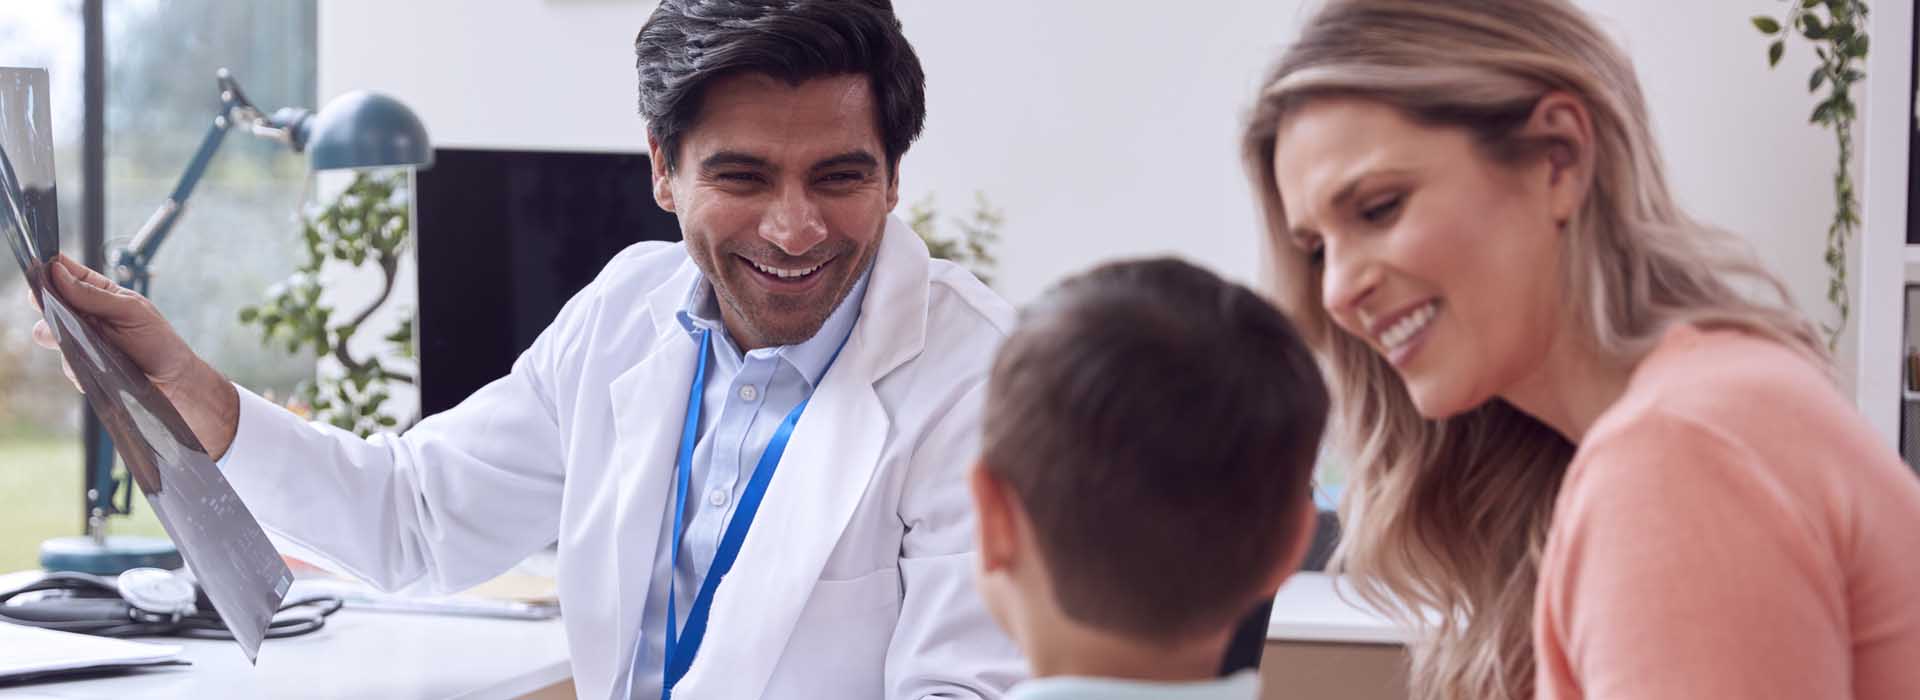 Doctor Or GP In White Coat Meeting Mother And Son For Appointment In Office